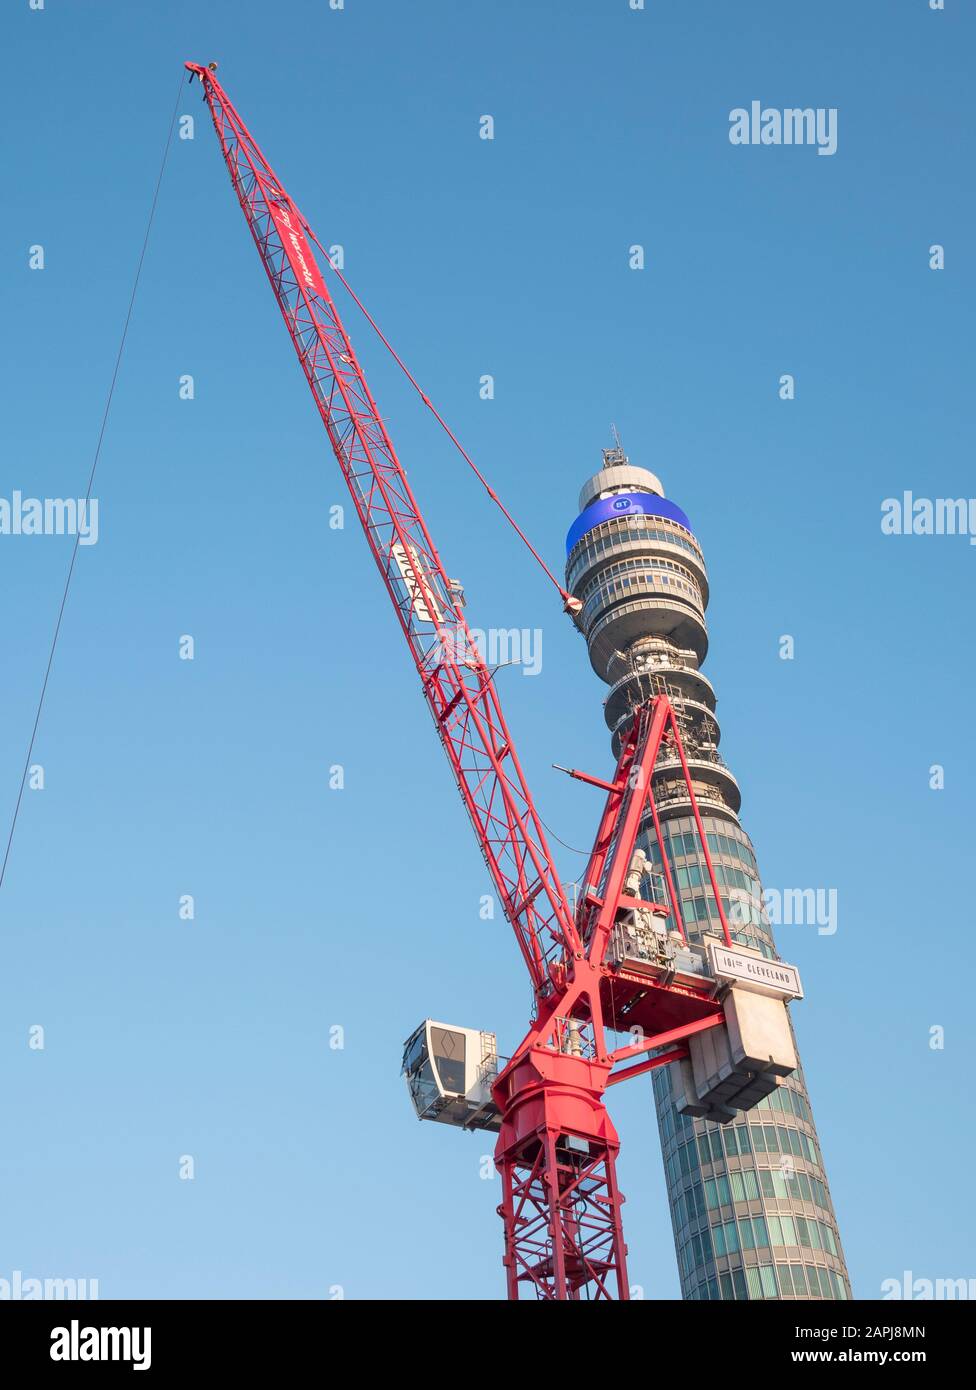 Red tower crane and Post Office Tower set against blue sky in Spring sunshine. Metaphor London construction activity, new builds, London sightseeing. Stock Photo